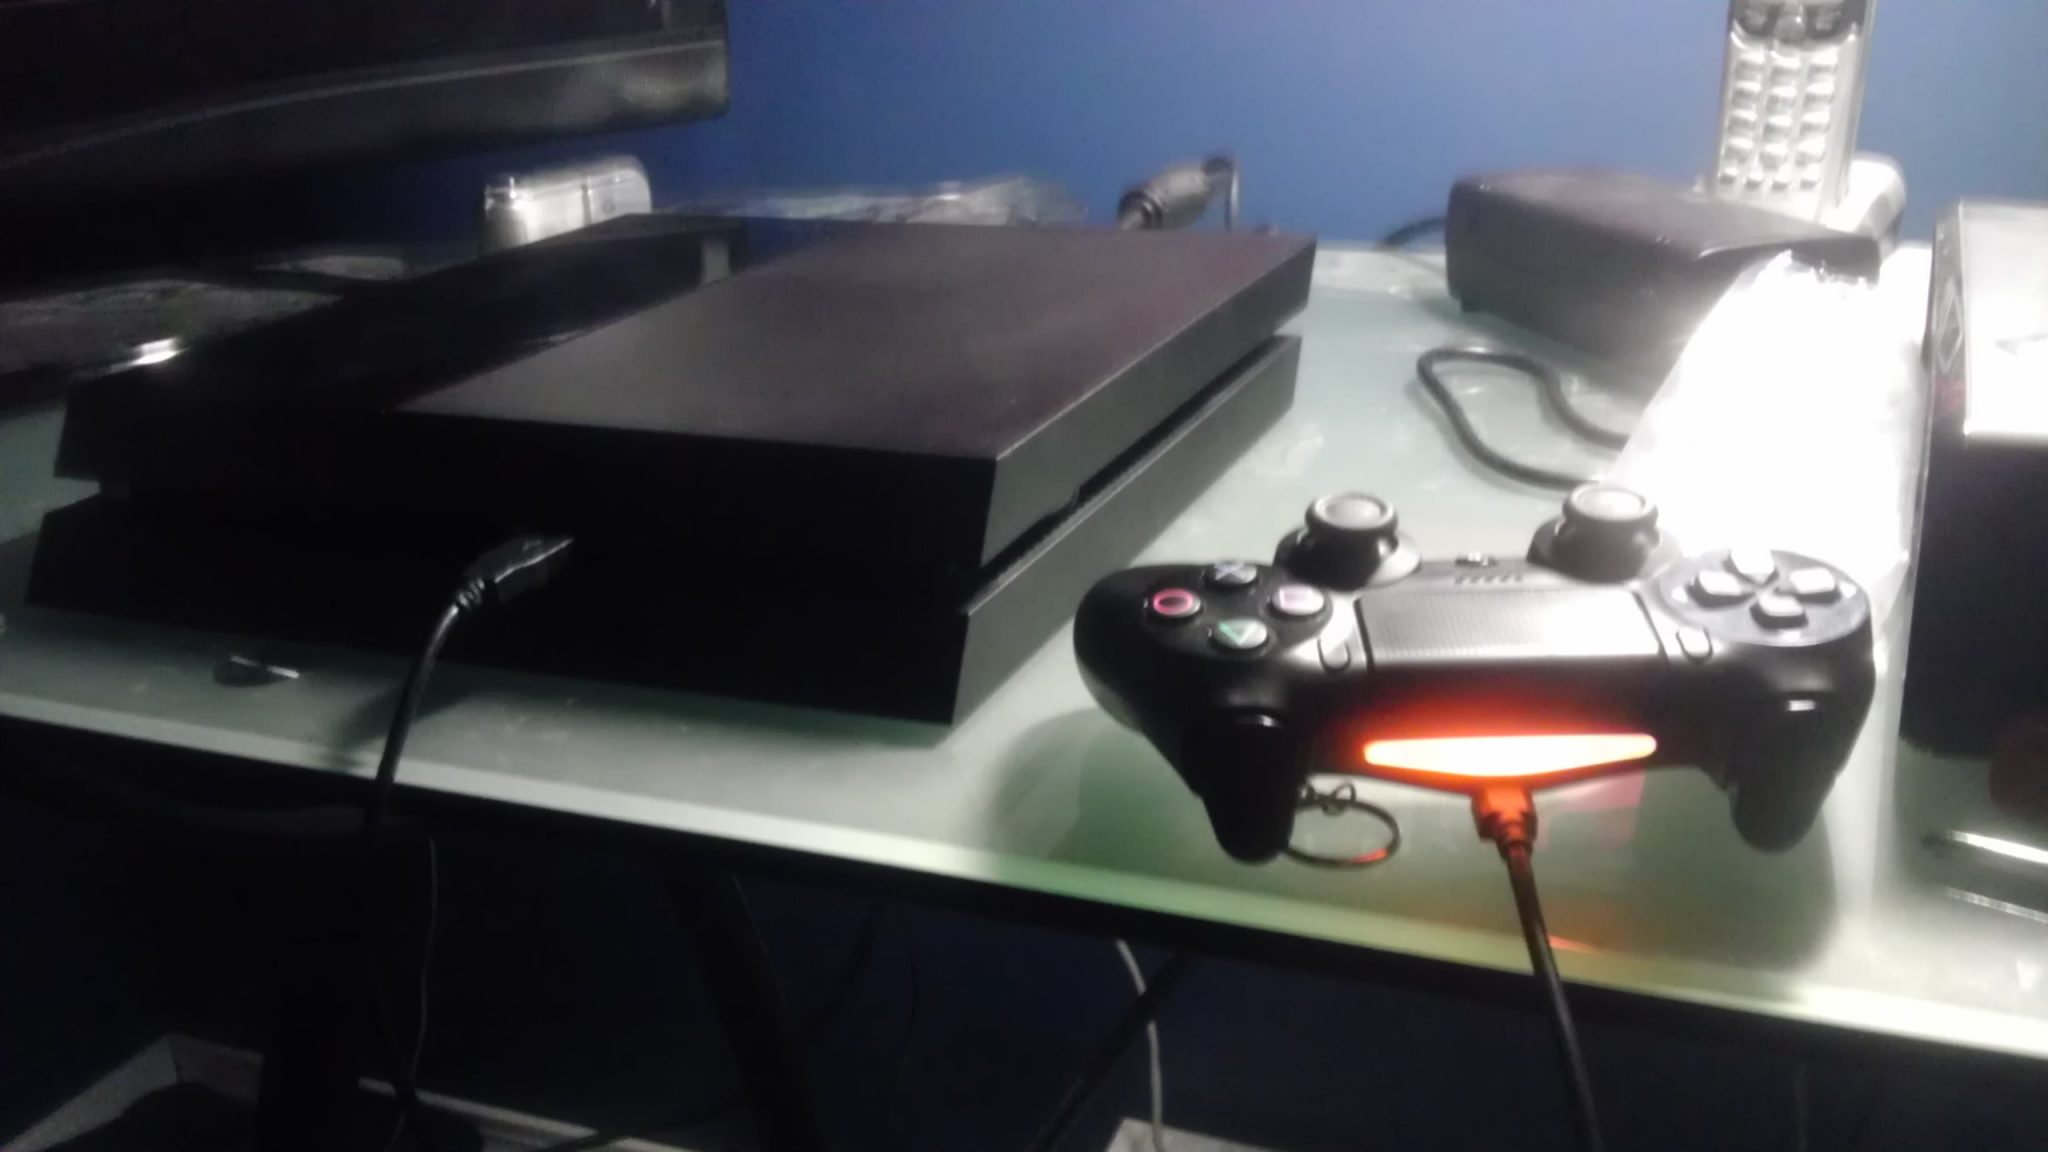 Can I Play Ps4 While Charging Controller?